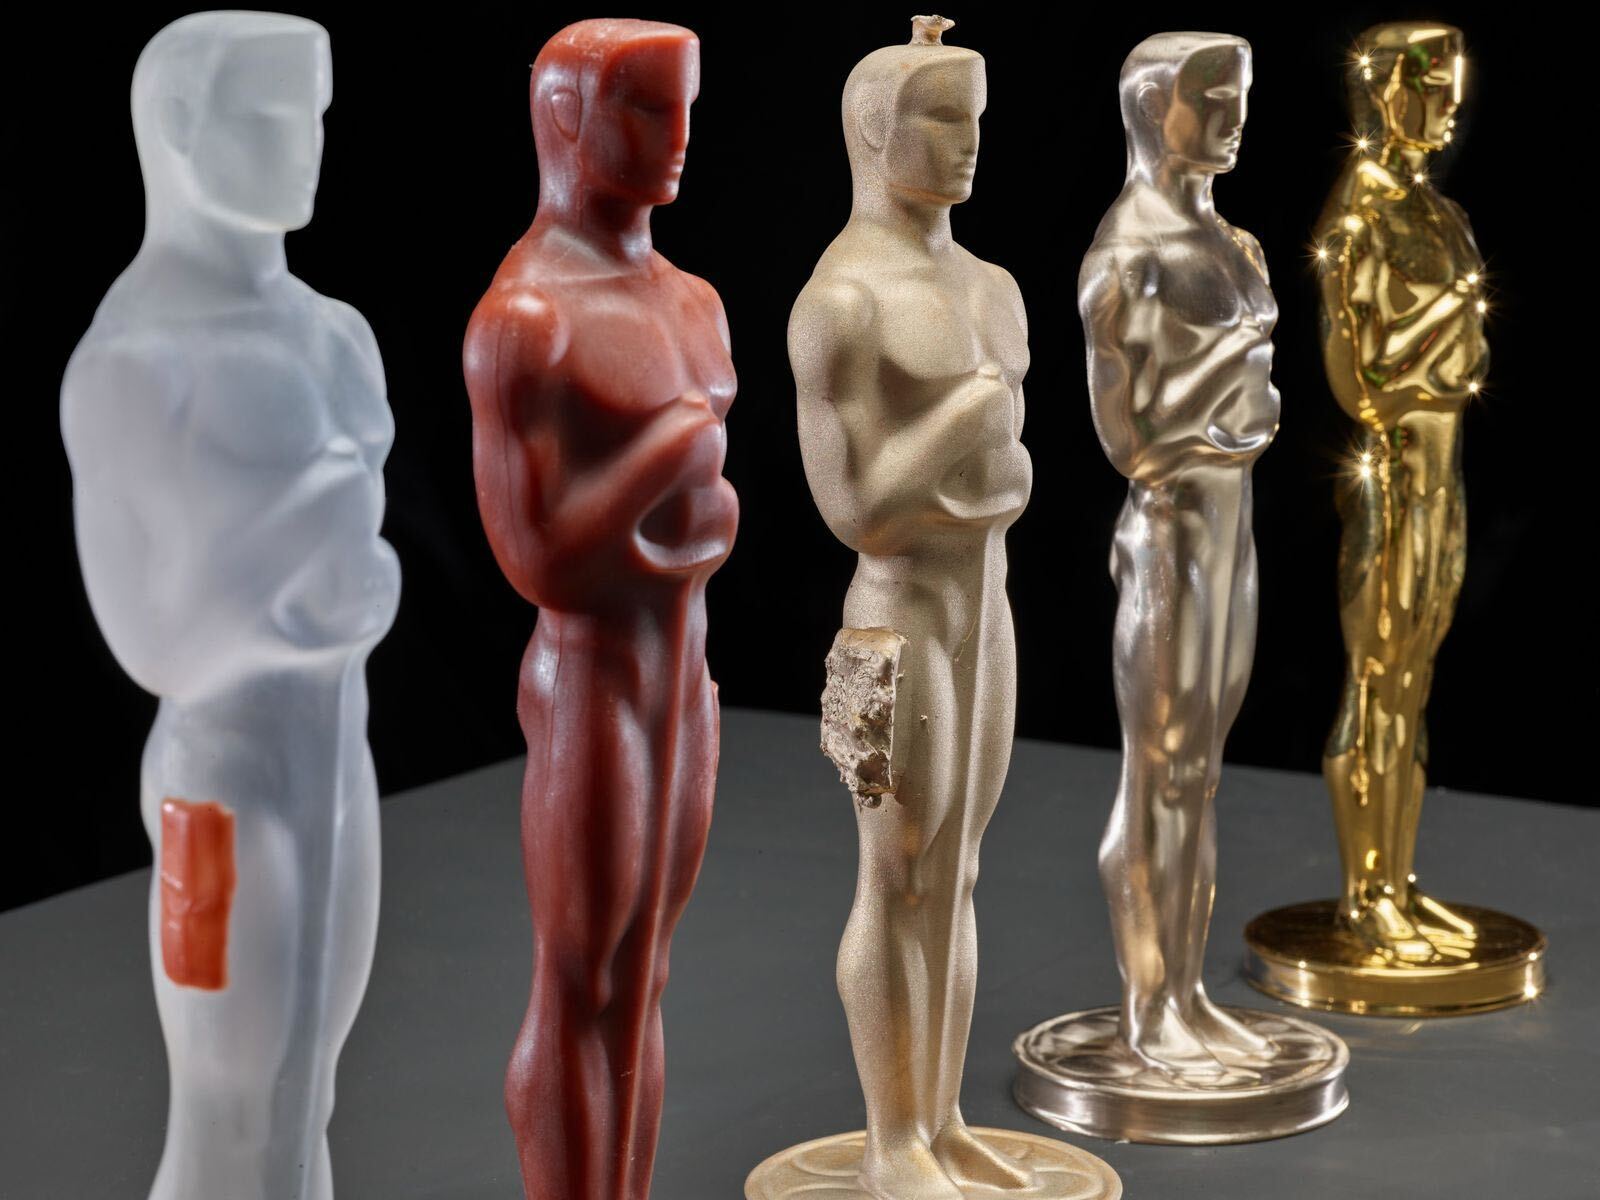 A look at Oscar statuettes at various steps of the manufacturing process — from the 3D-printed model on the left to the final gold-plated version on the right.